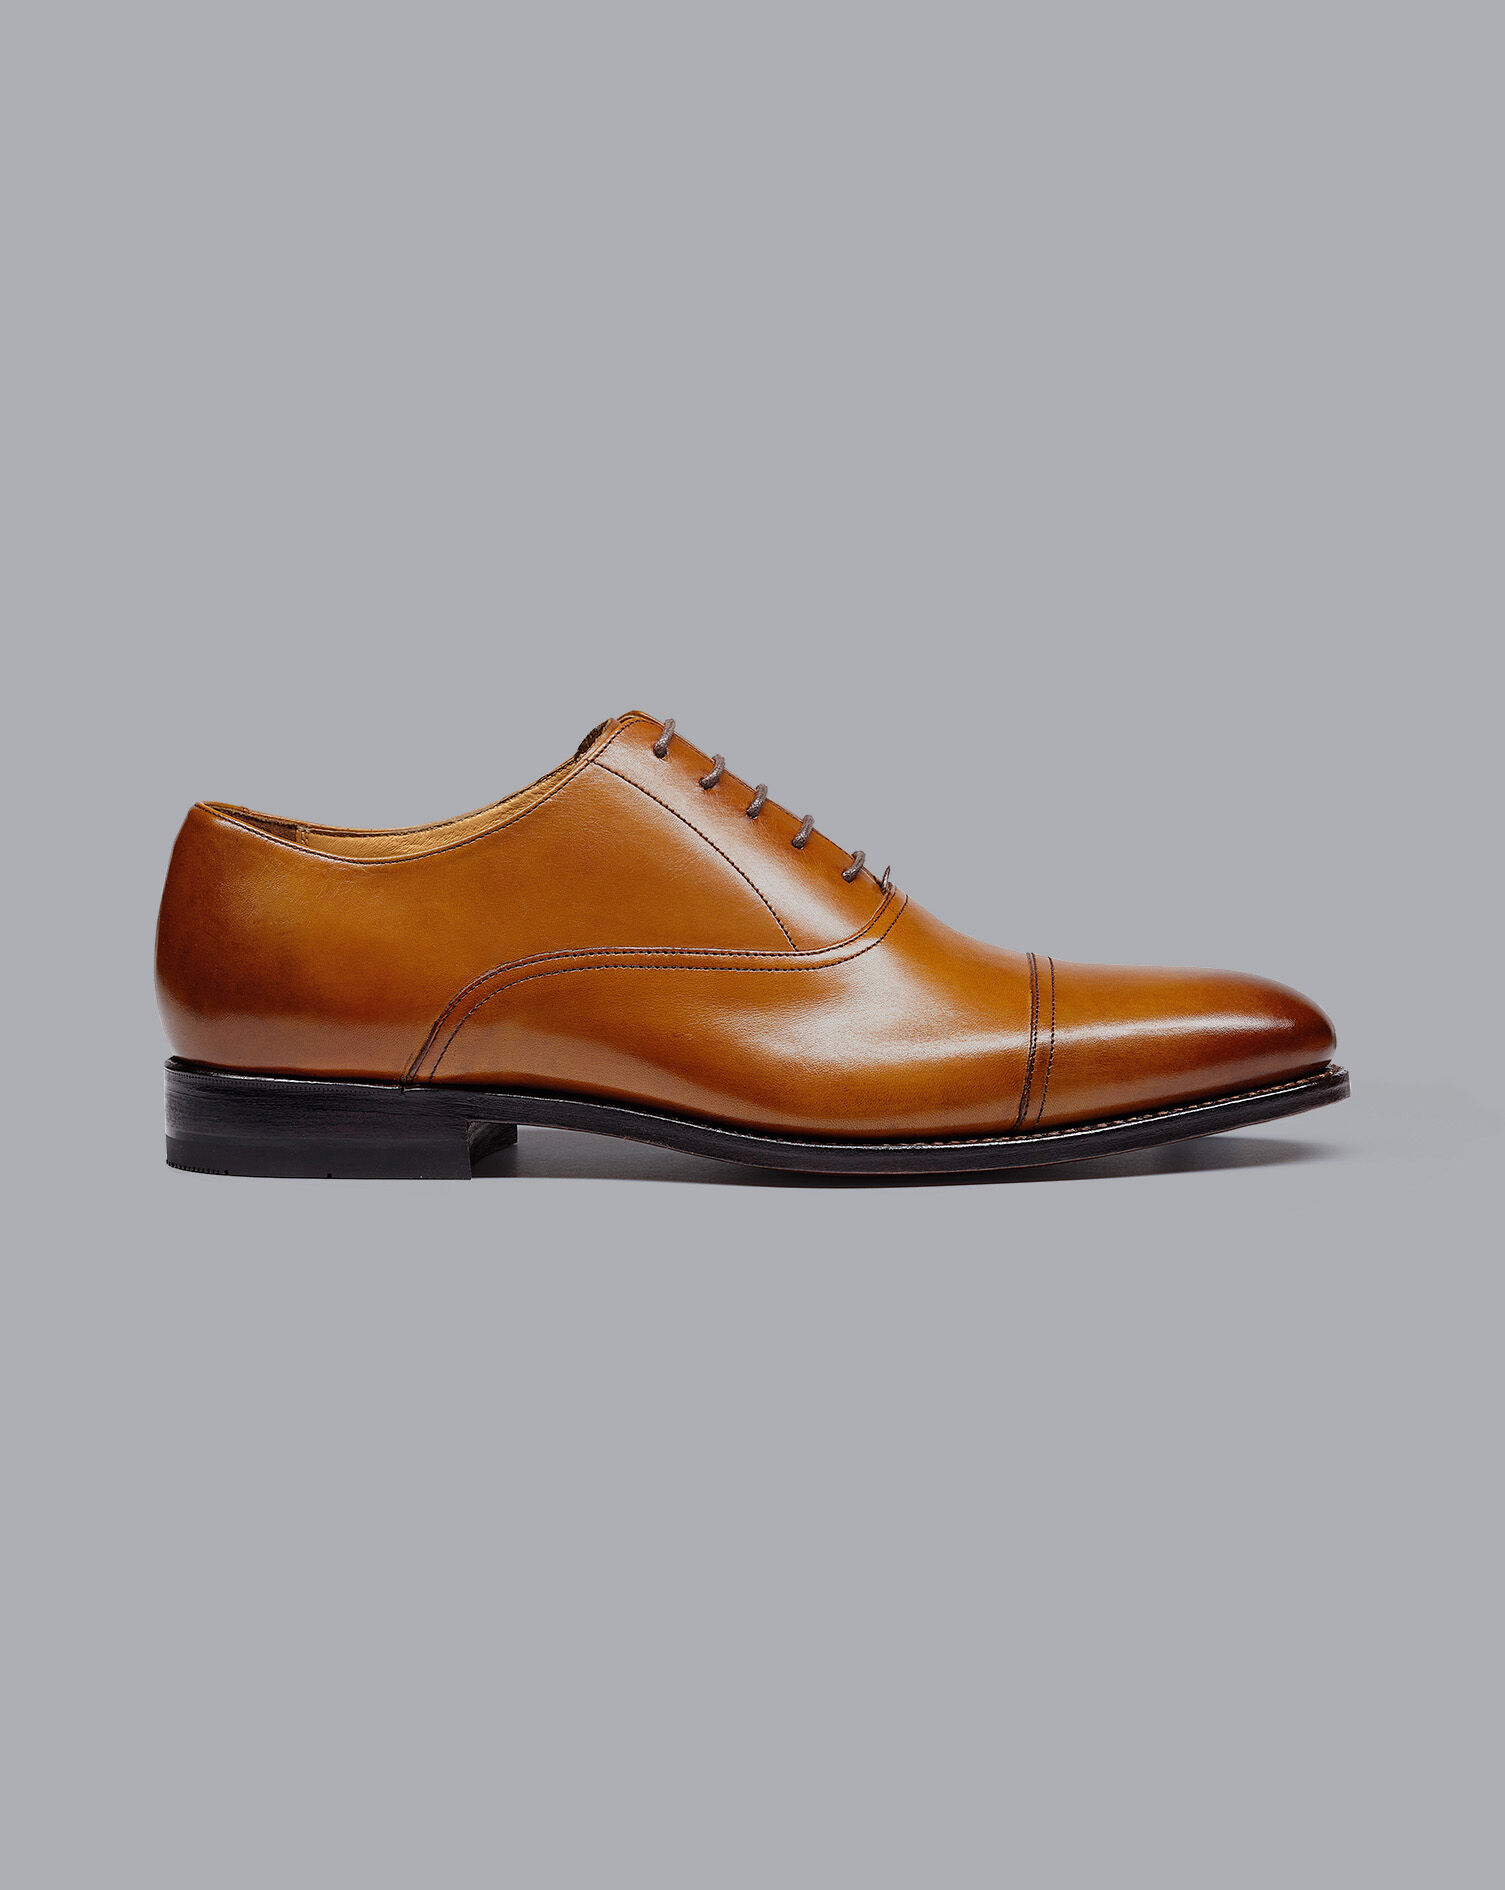 Gordon and Bros Lucquin 2830 classic welted mens Oxford lace up shoes with leather sole and decorated toecap Goodyear welted 